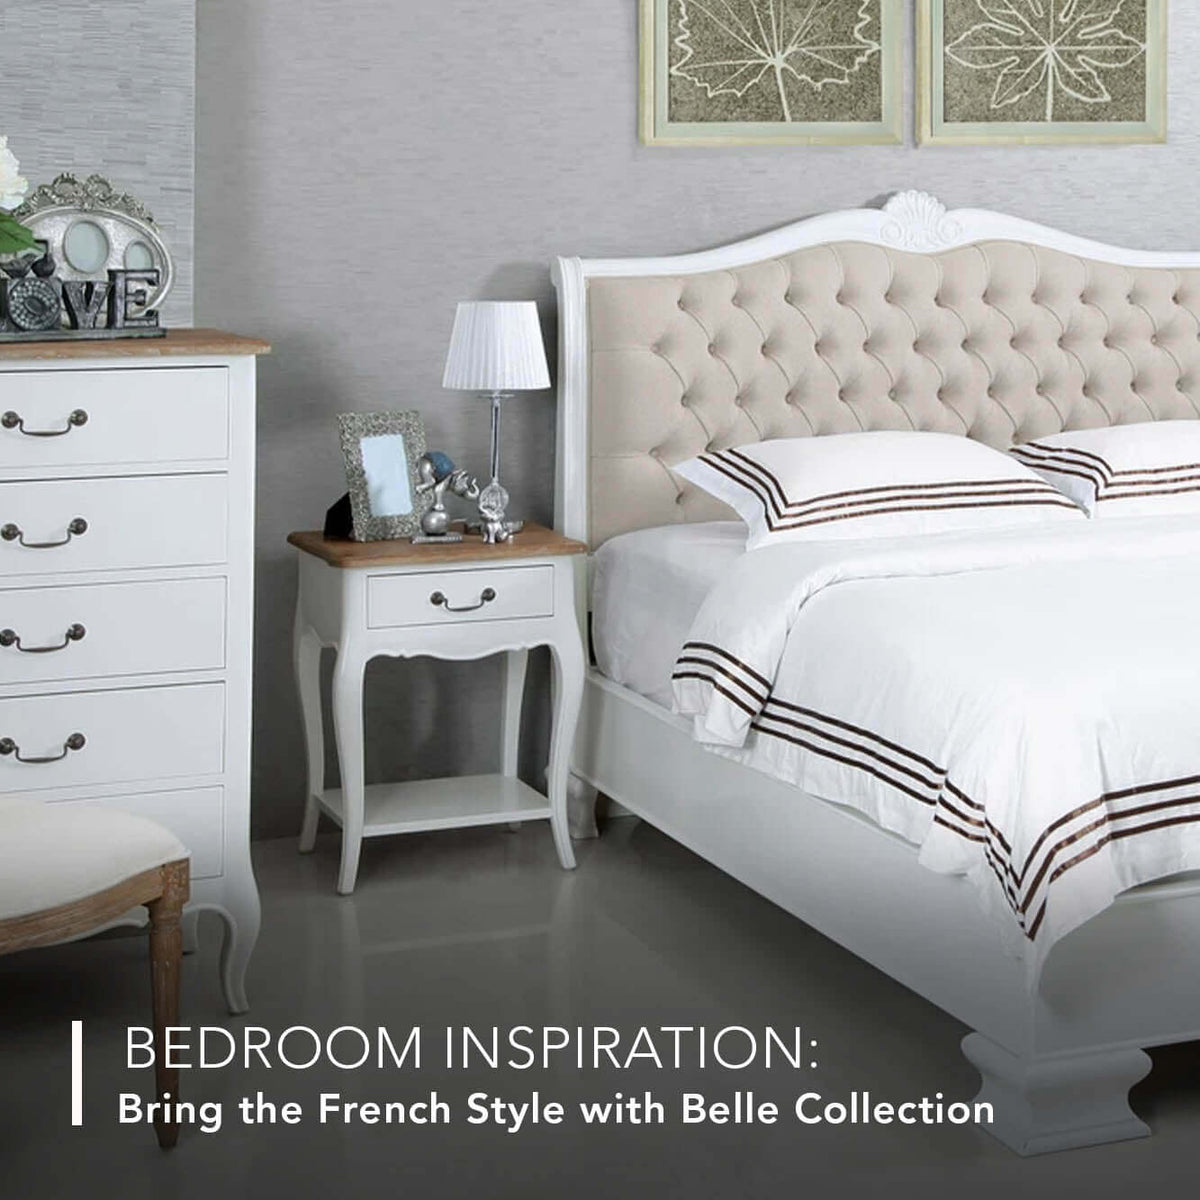 Bedroom Inspiration: Bring the French Style with Belle Collection